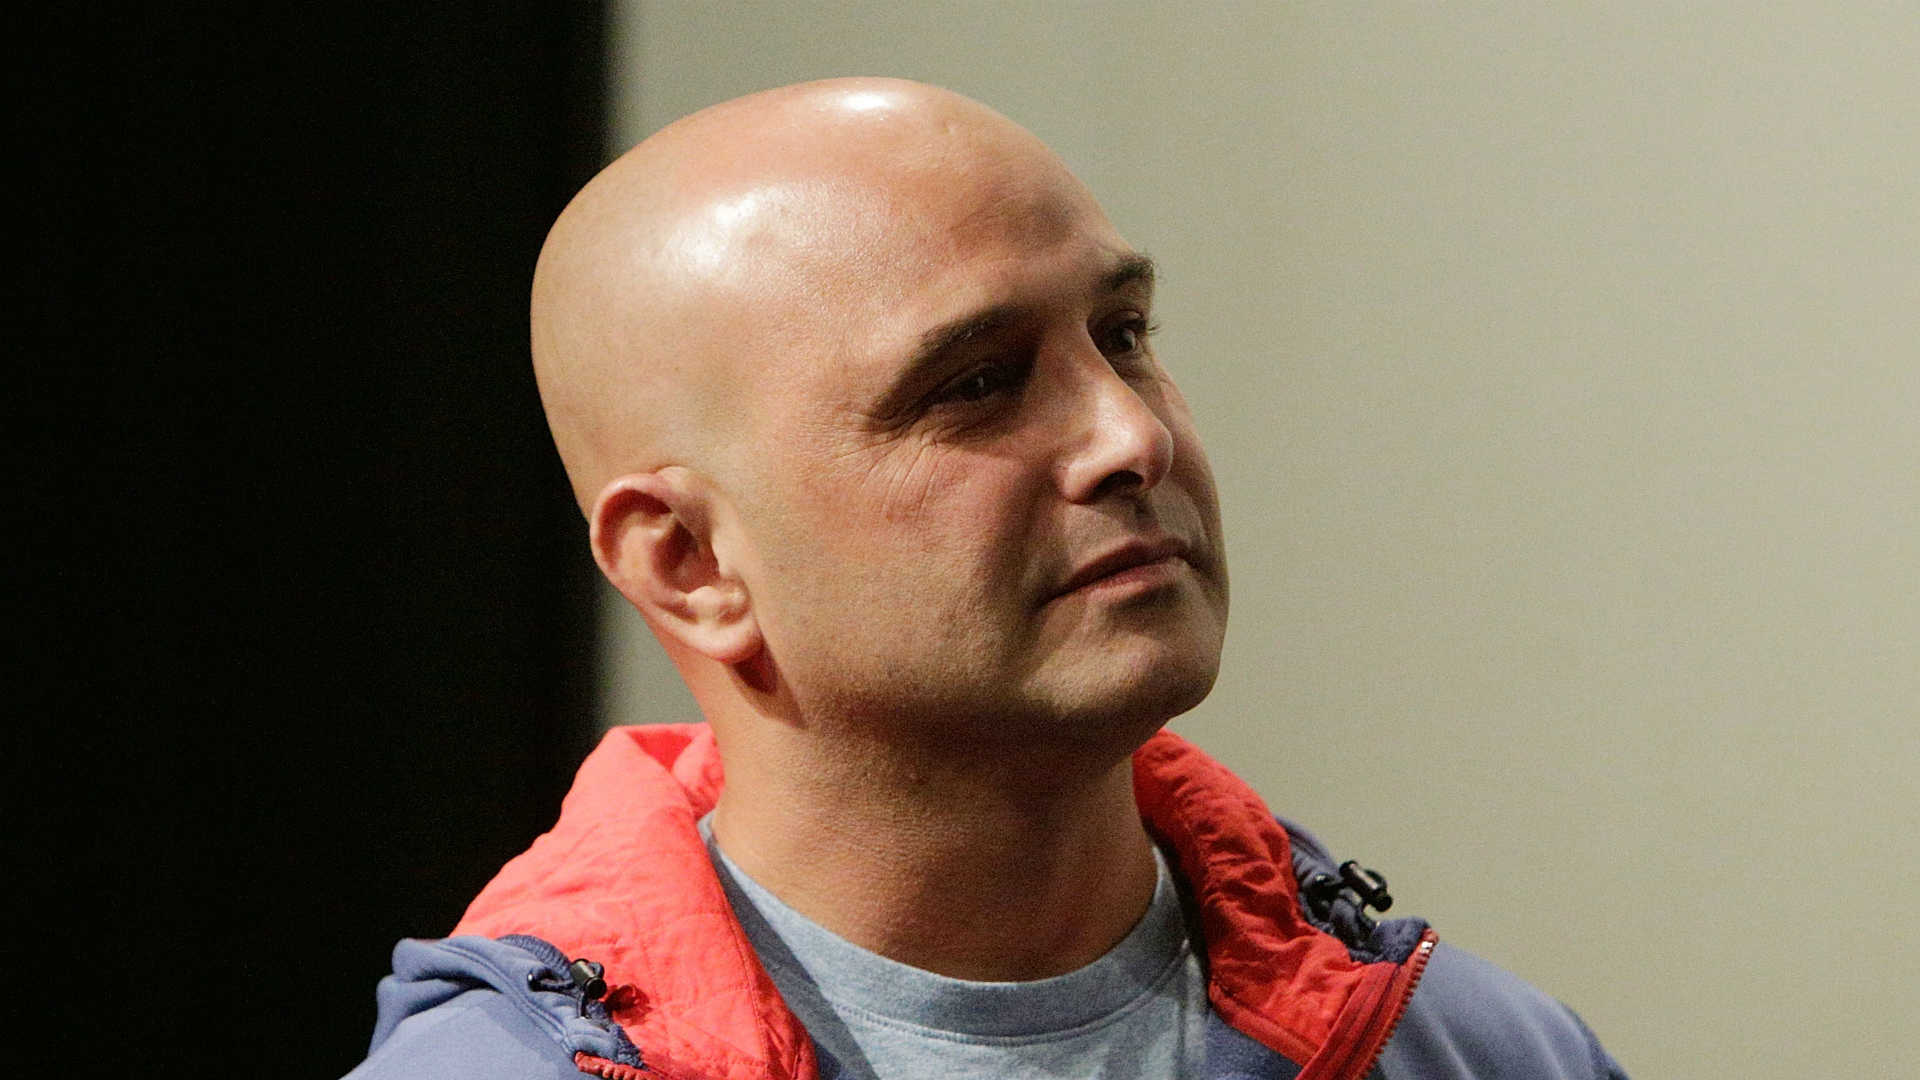 Craig Carton, former 'Boomer and Carton' co-host on WFAN, gets 3 1/2 years in prison